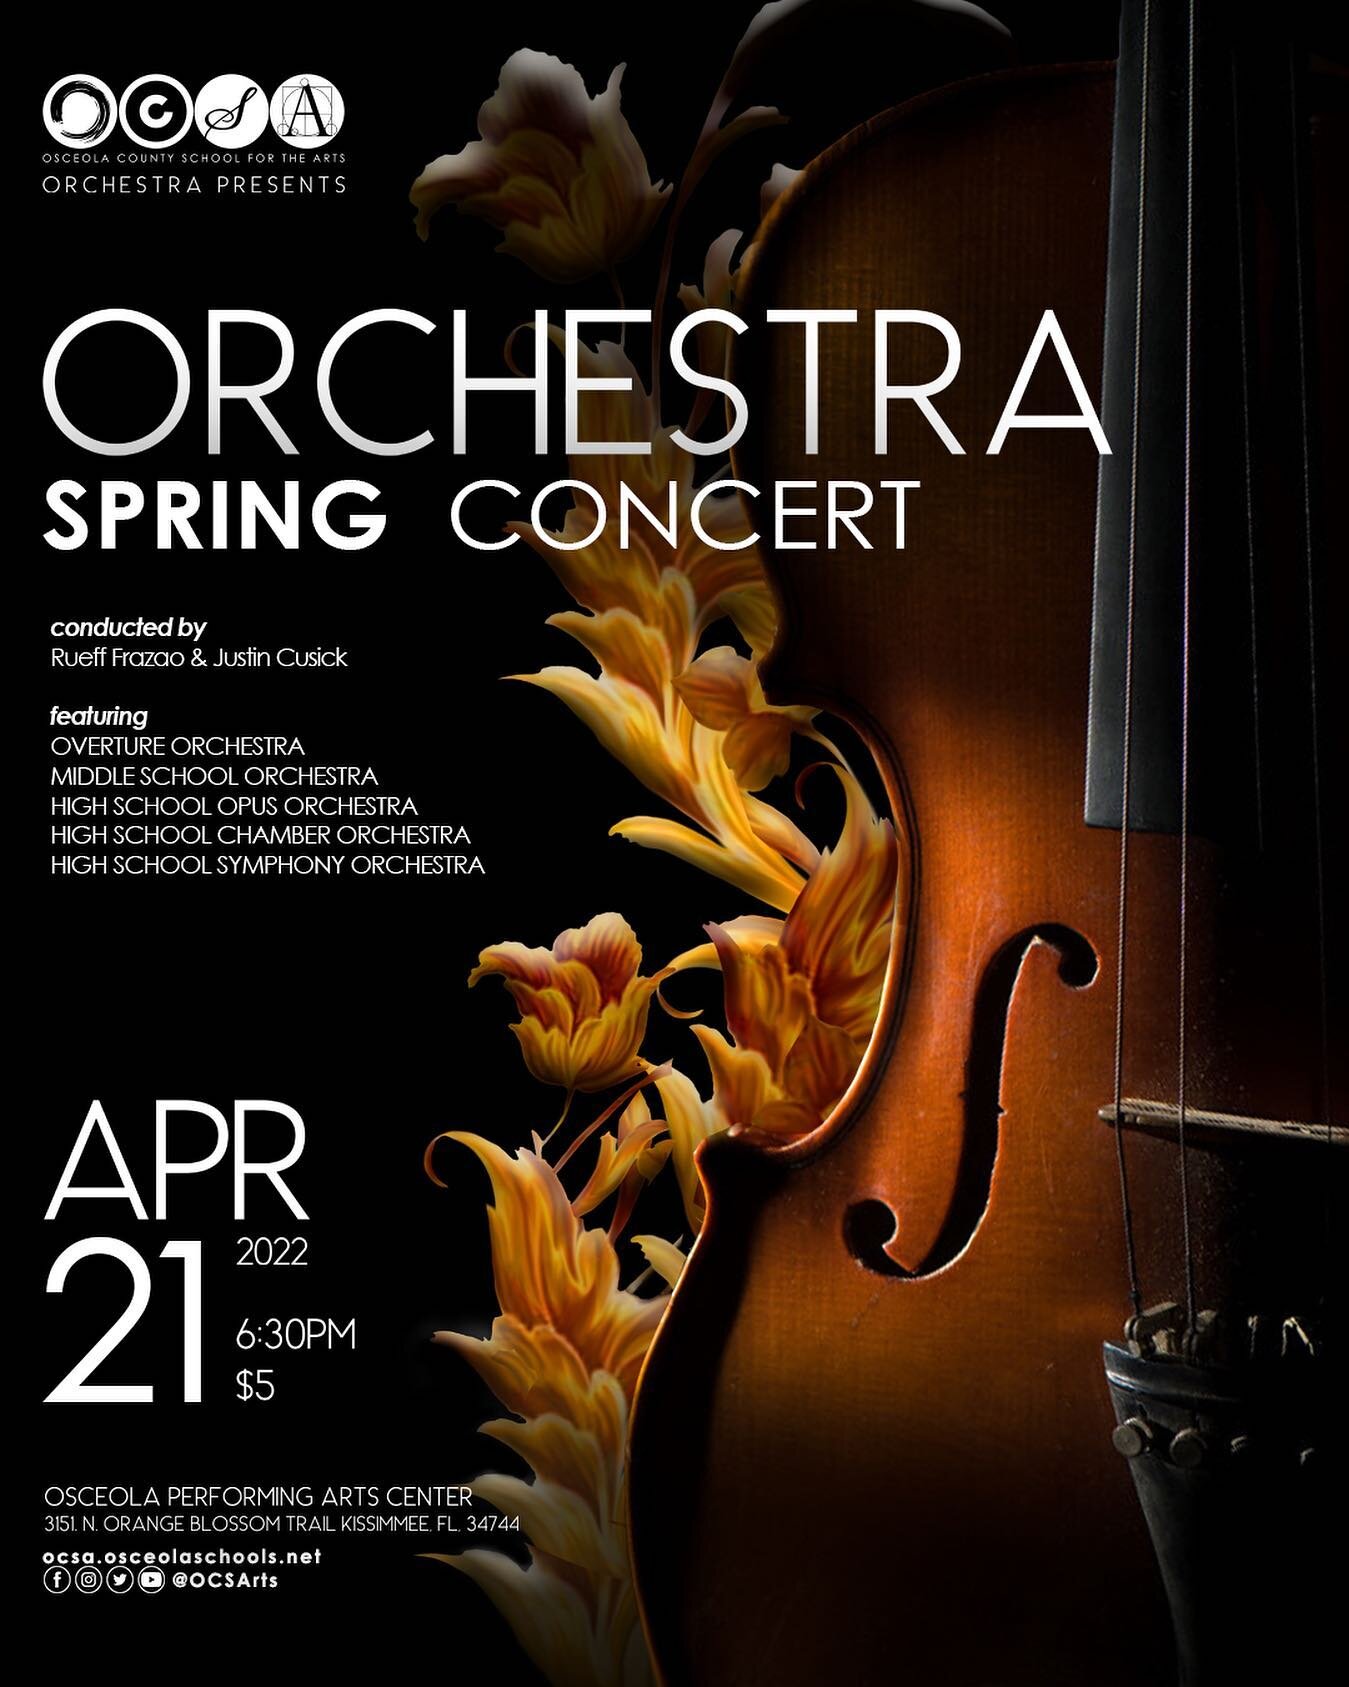 Concert tomorrow with @ocsaorchestra 🎻